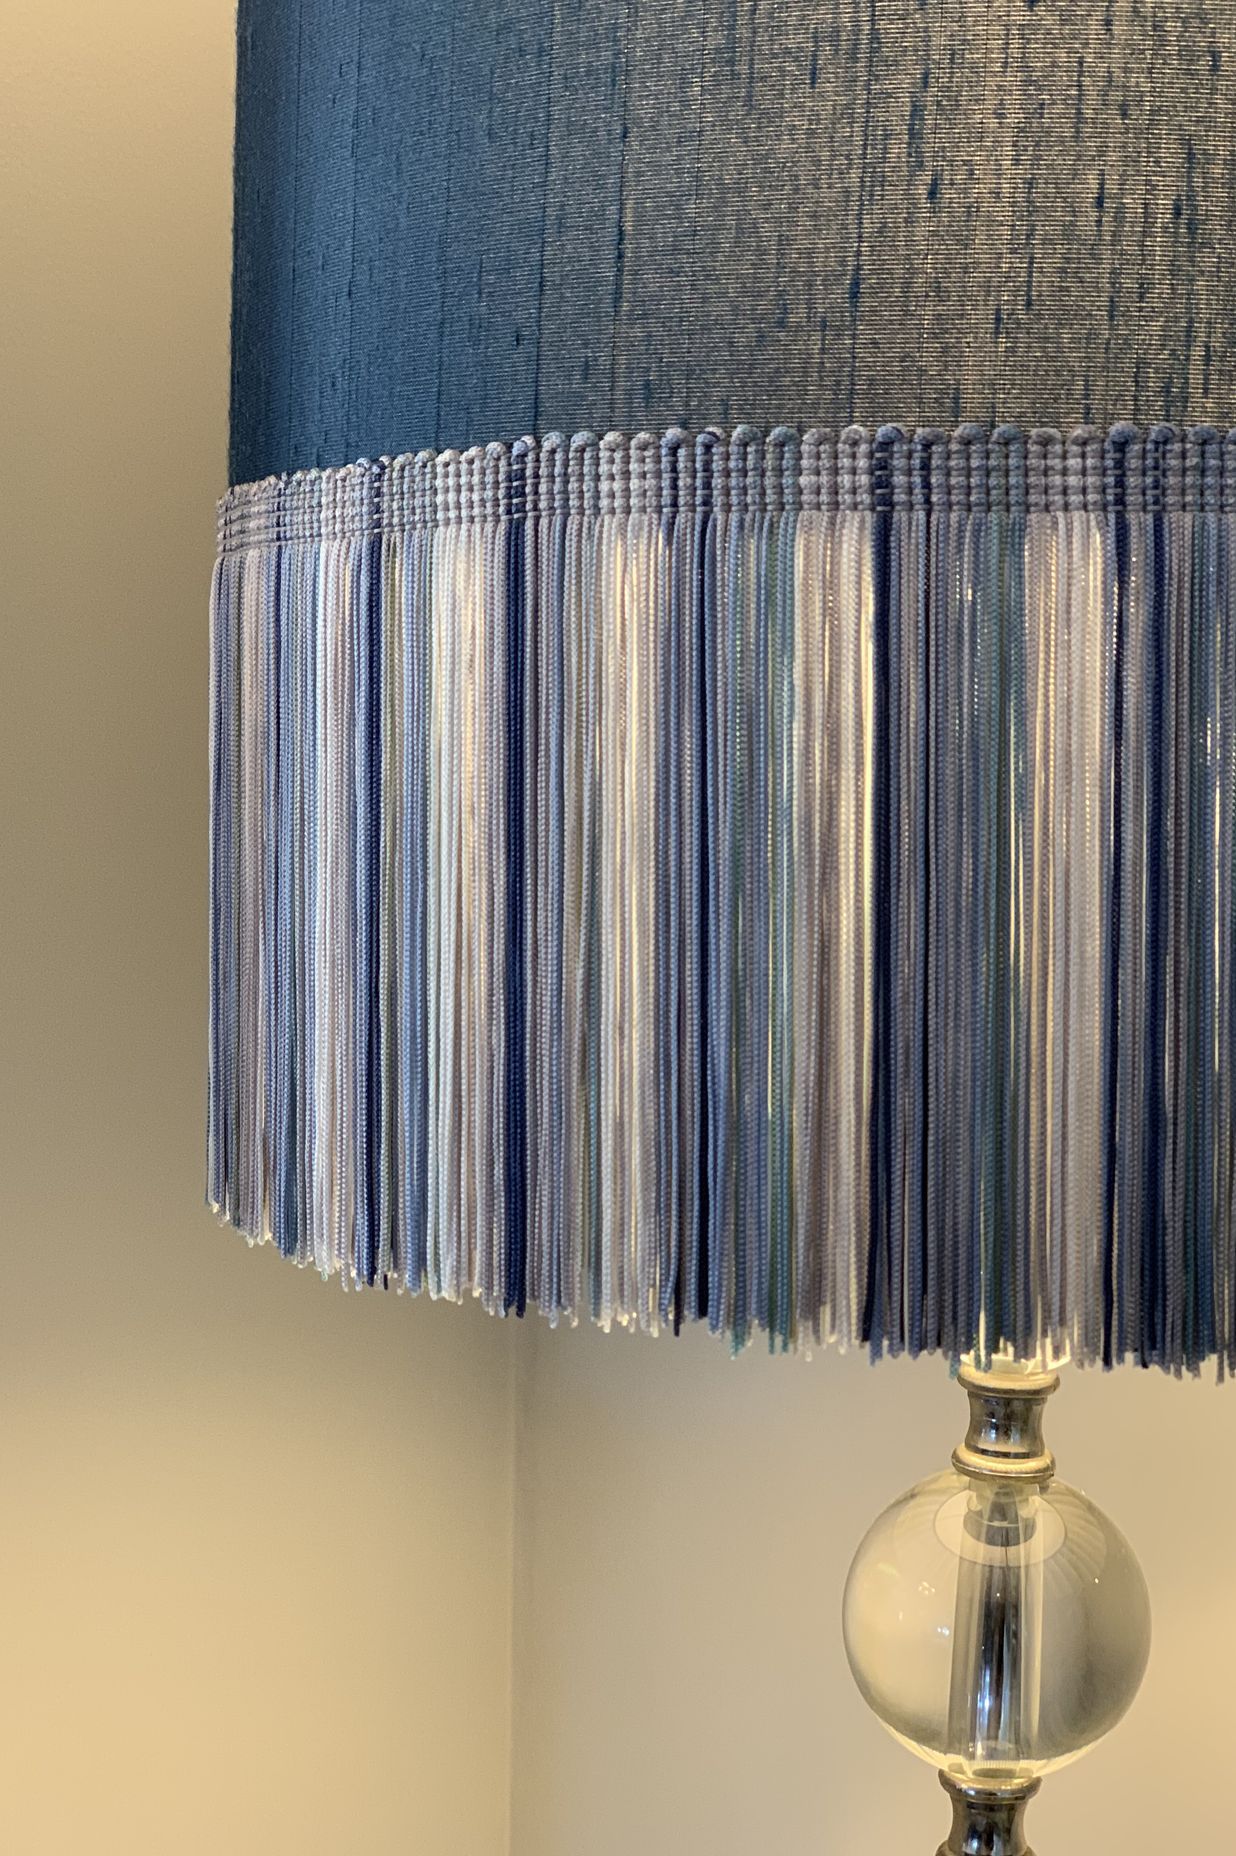 Adding colour and texture - a lamp shade with long fringing in shades of blue